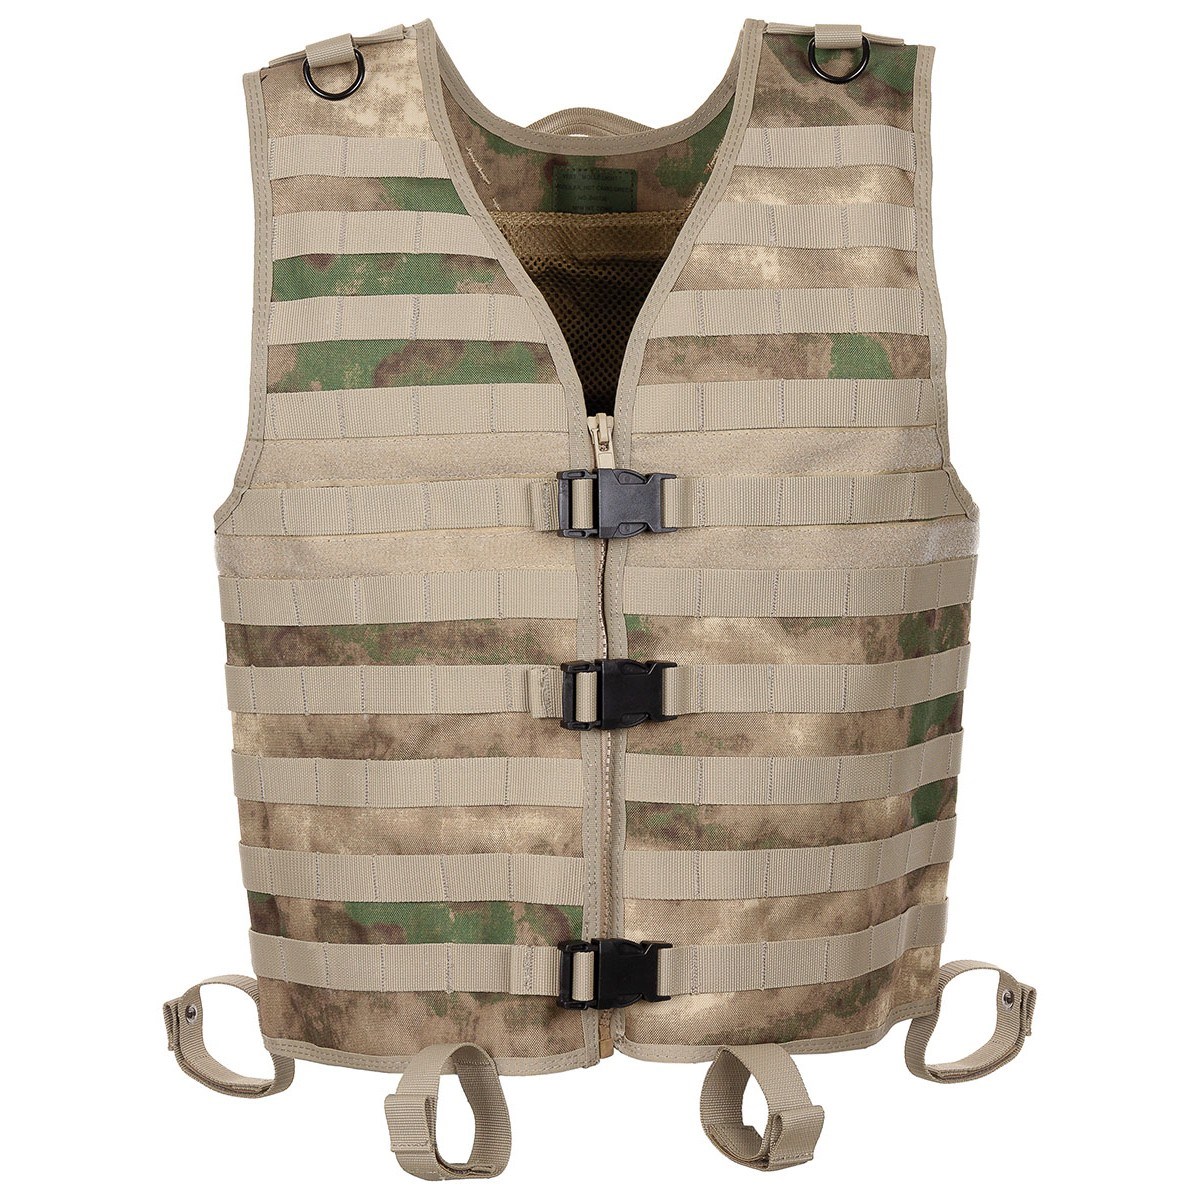 MFH Light Hunting MOLLE Vest Fishing Top Airsoft Army Combat Carrier HDT Camo FG 